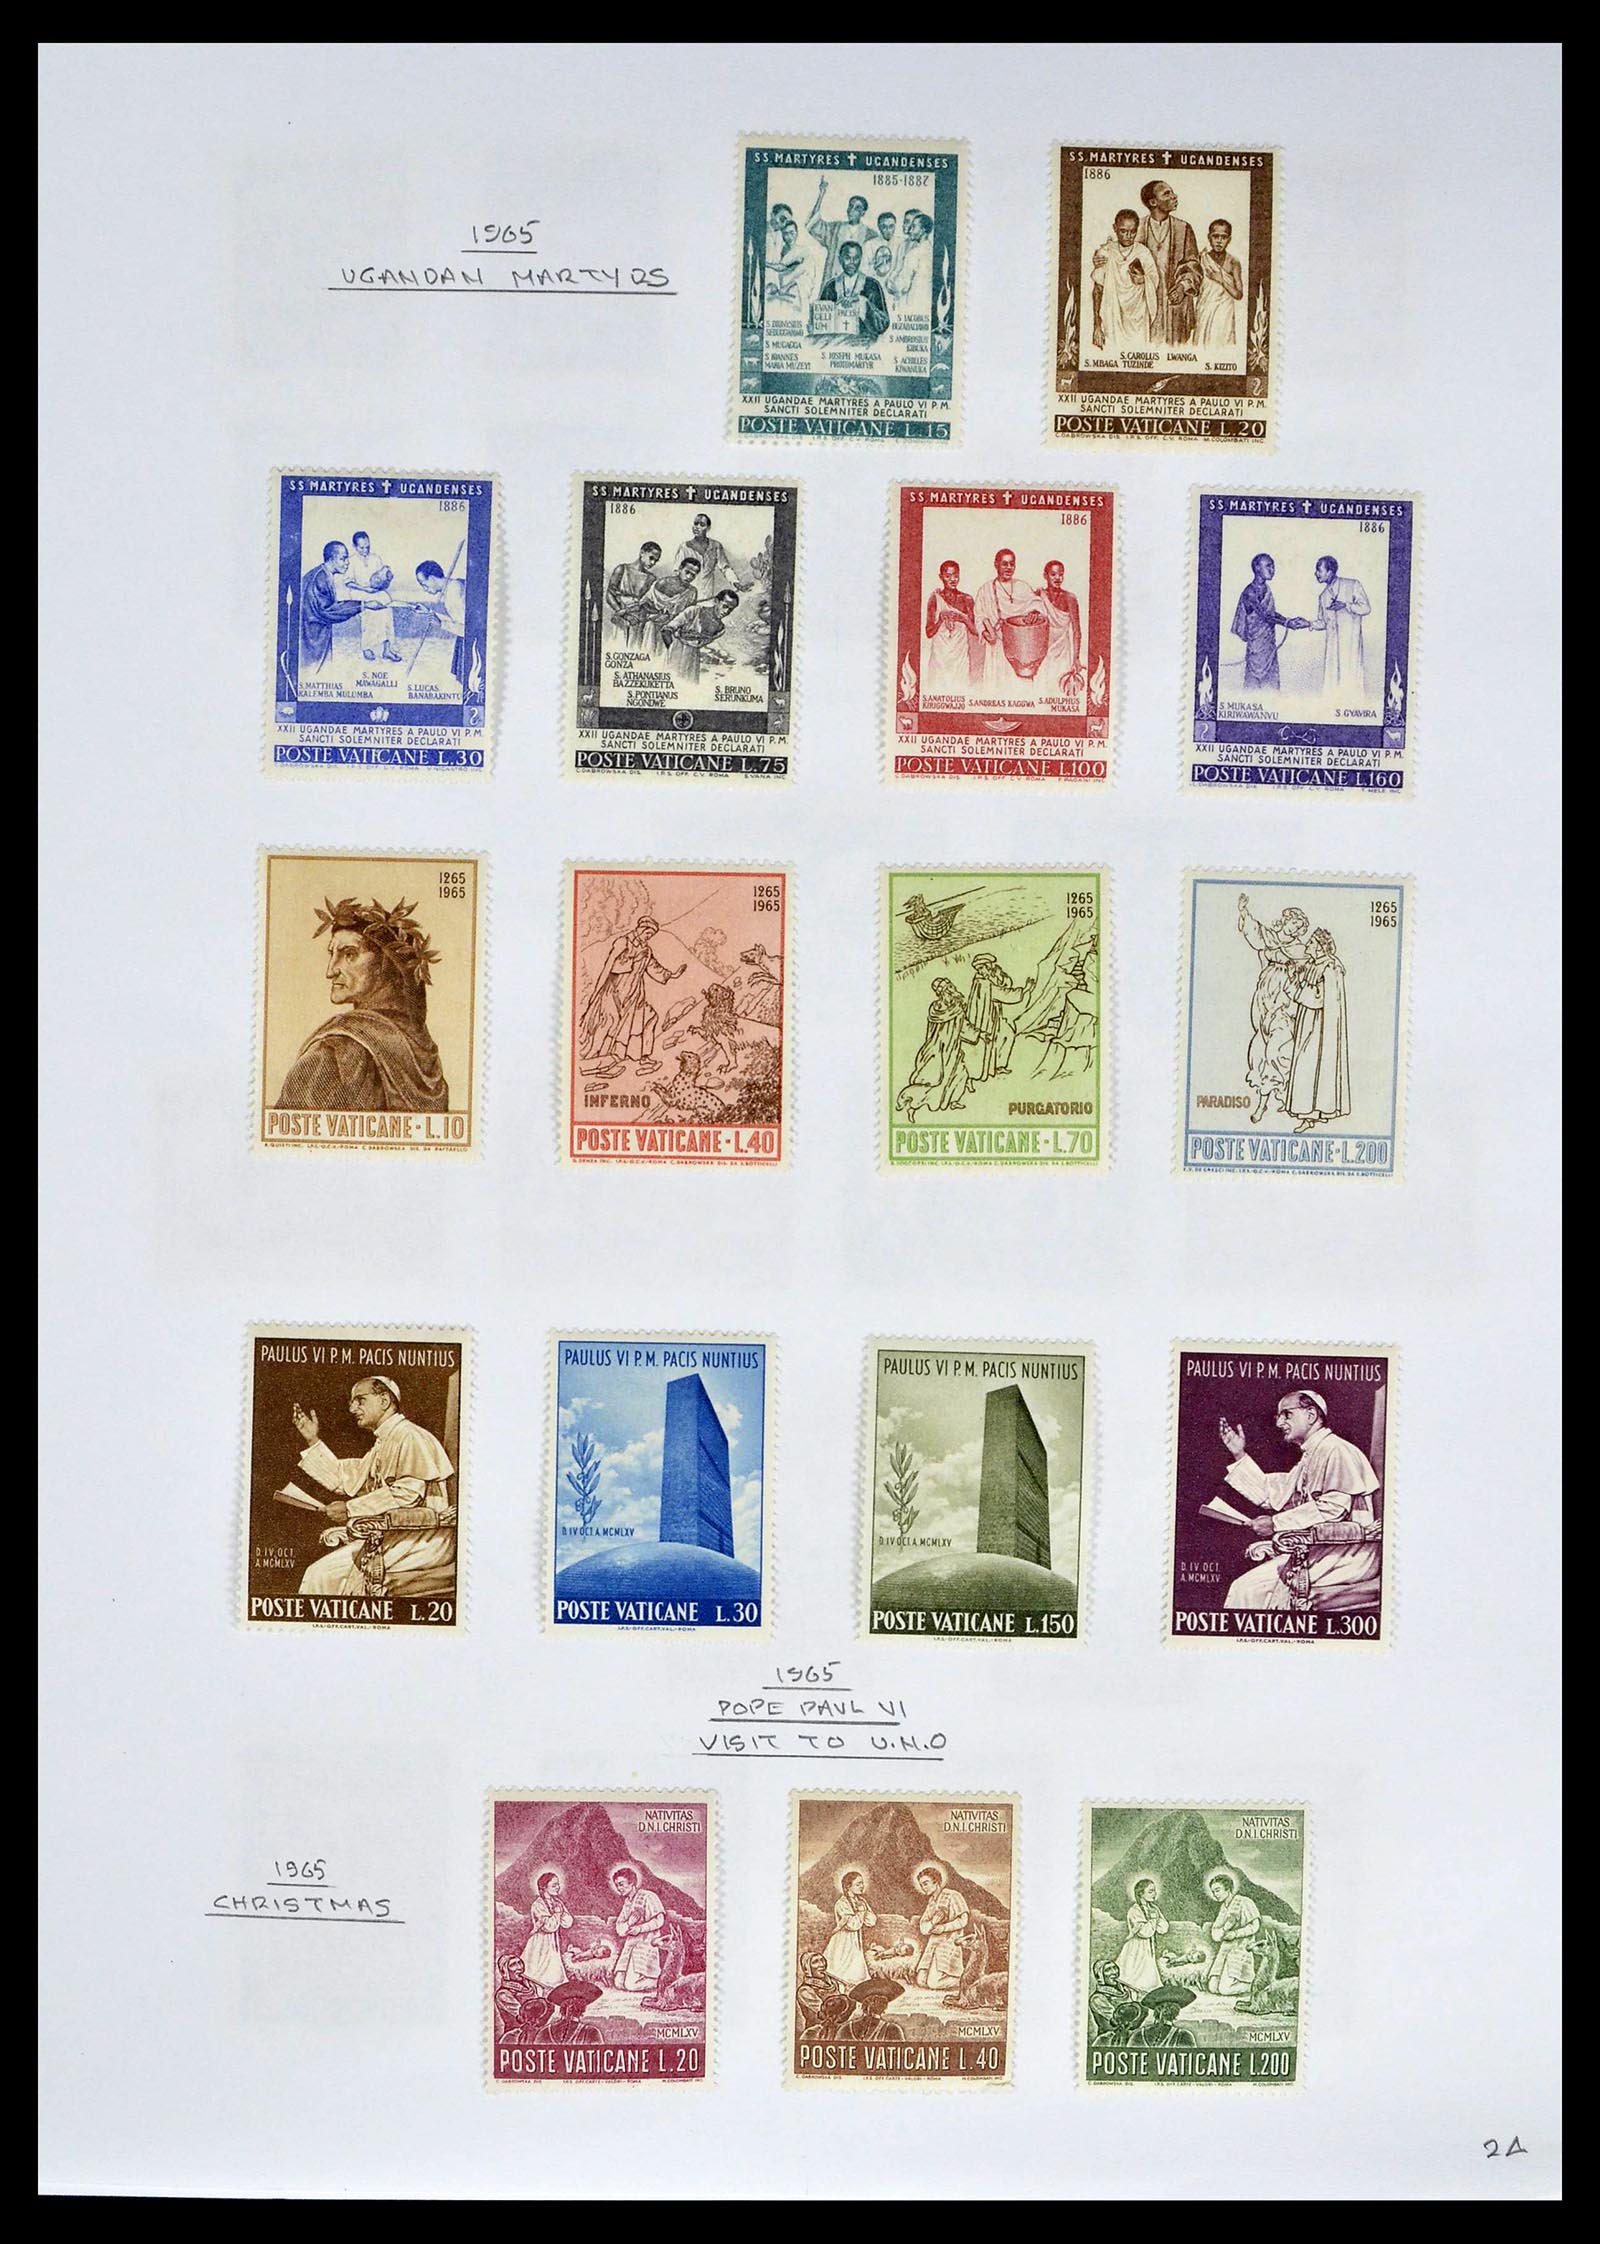 39099 0026 - Stamp collection 39099 Vatican 1852-2008.